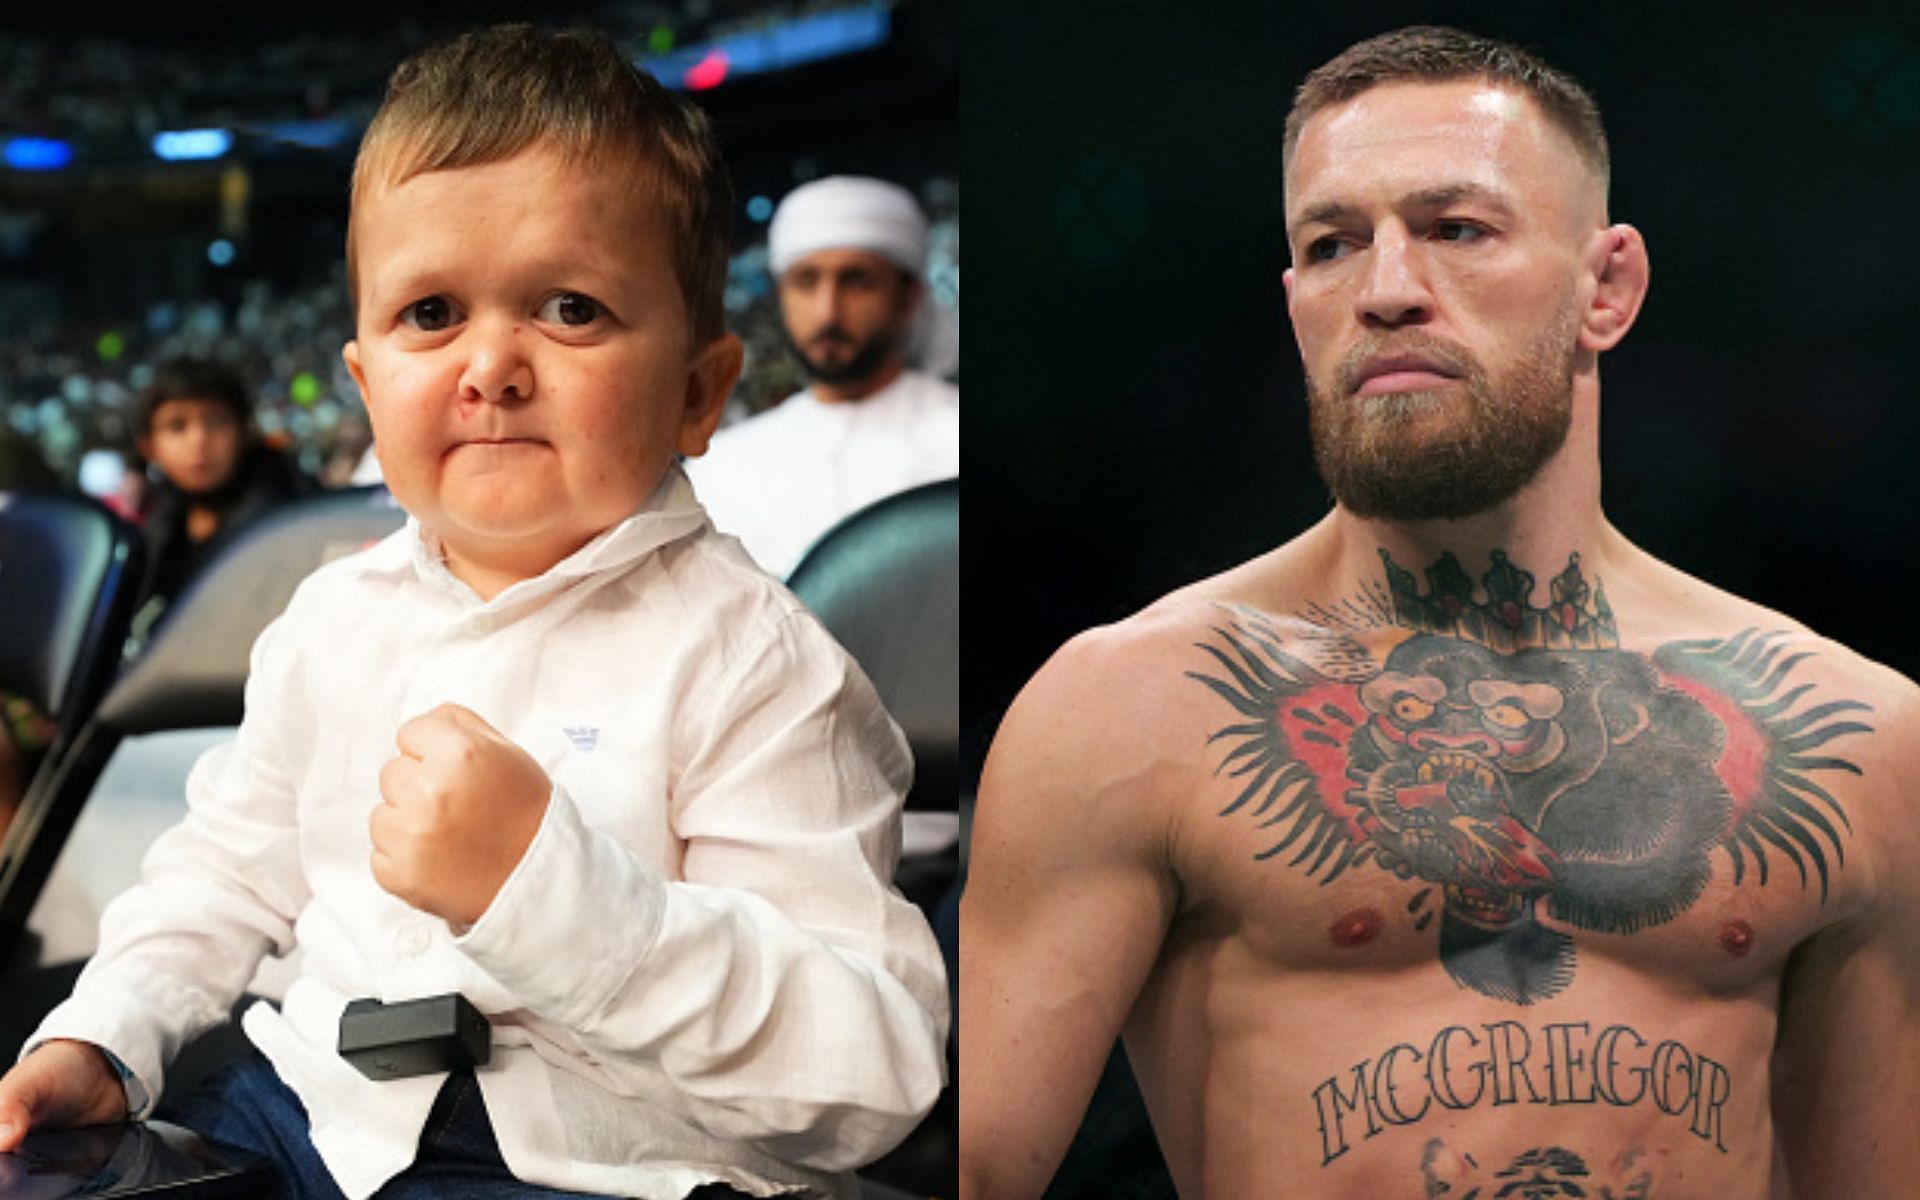 Hasbulla (left), Conor McGregor (right) [Images courtesy: Getty]